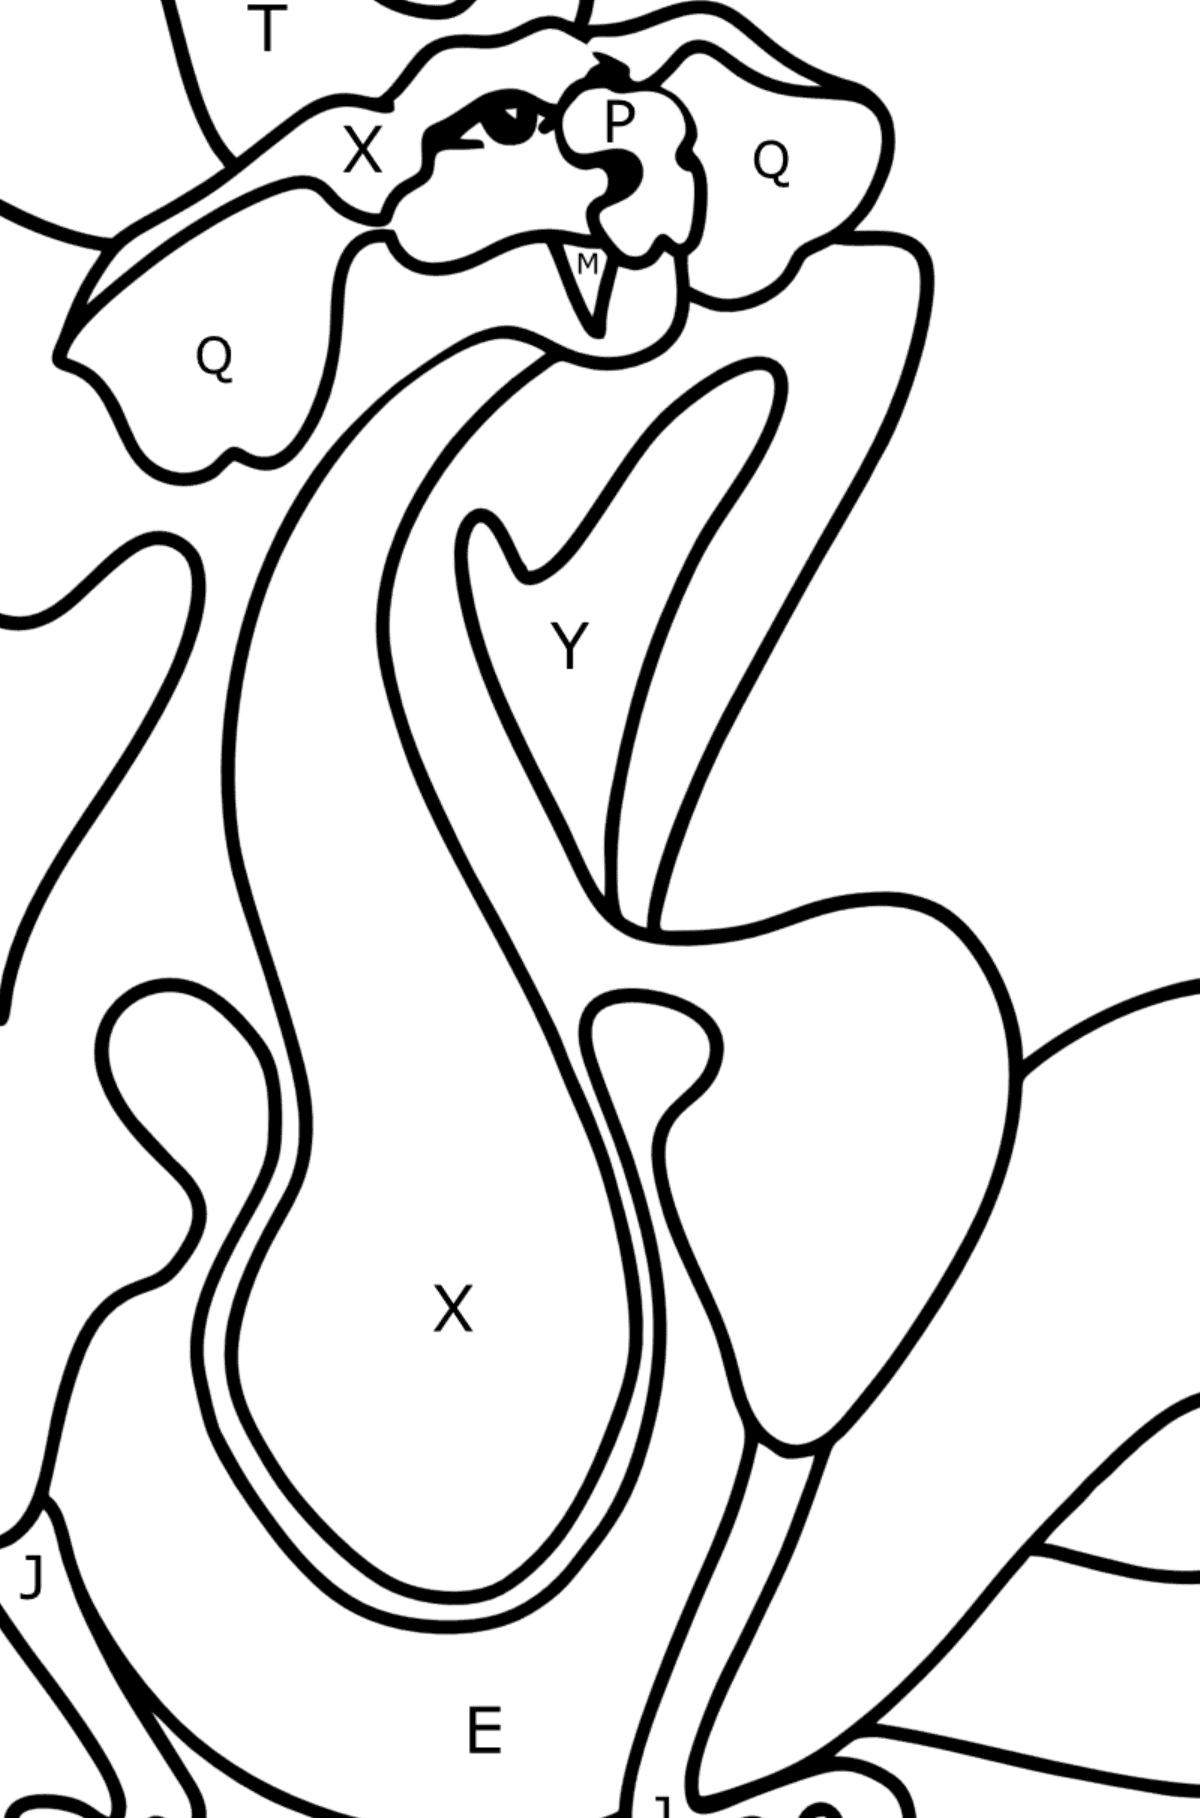 Sad Dragon coloring page - Coloring by Letters for Kids